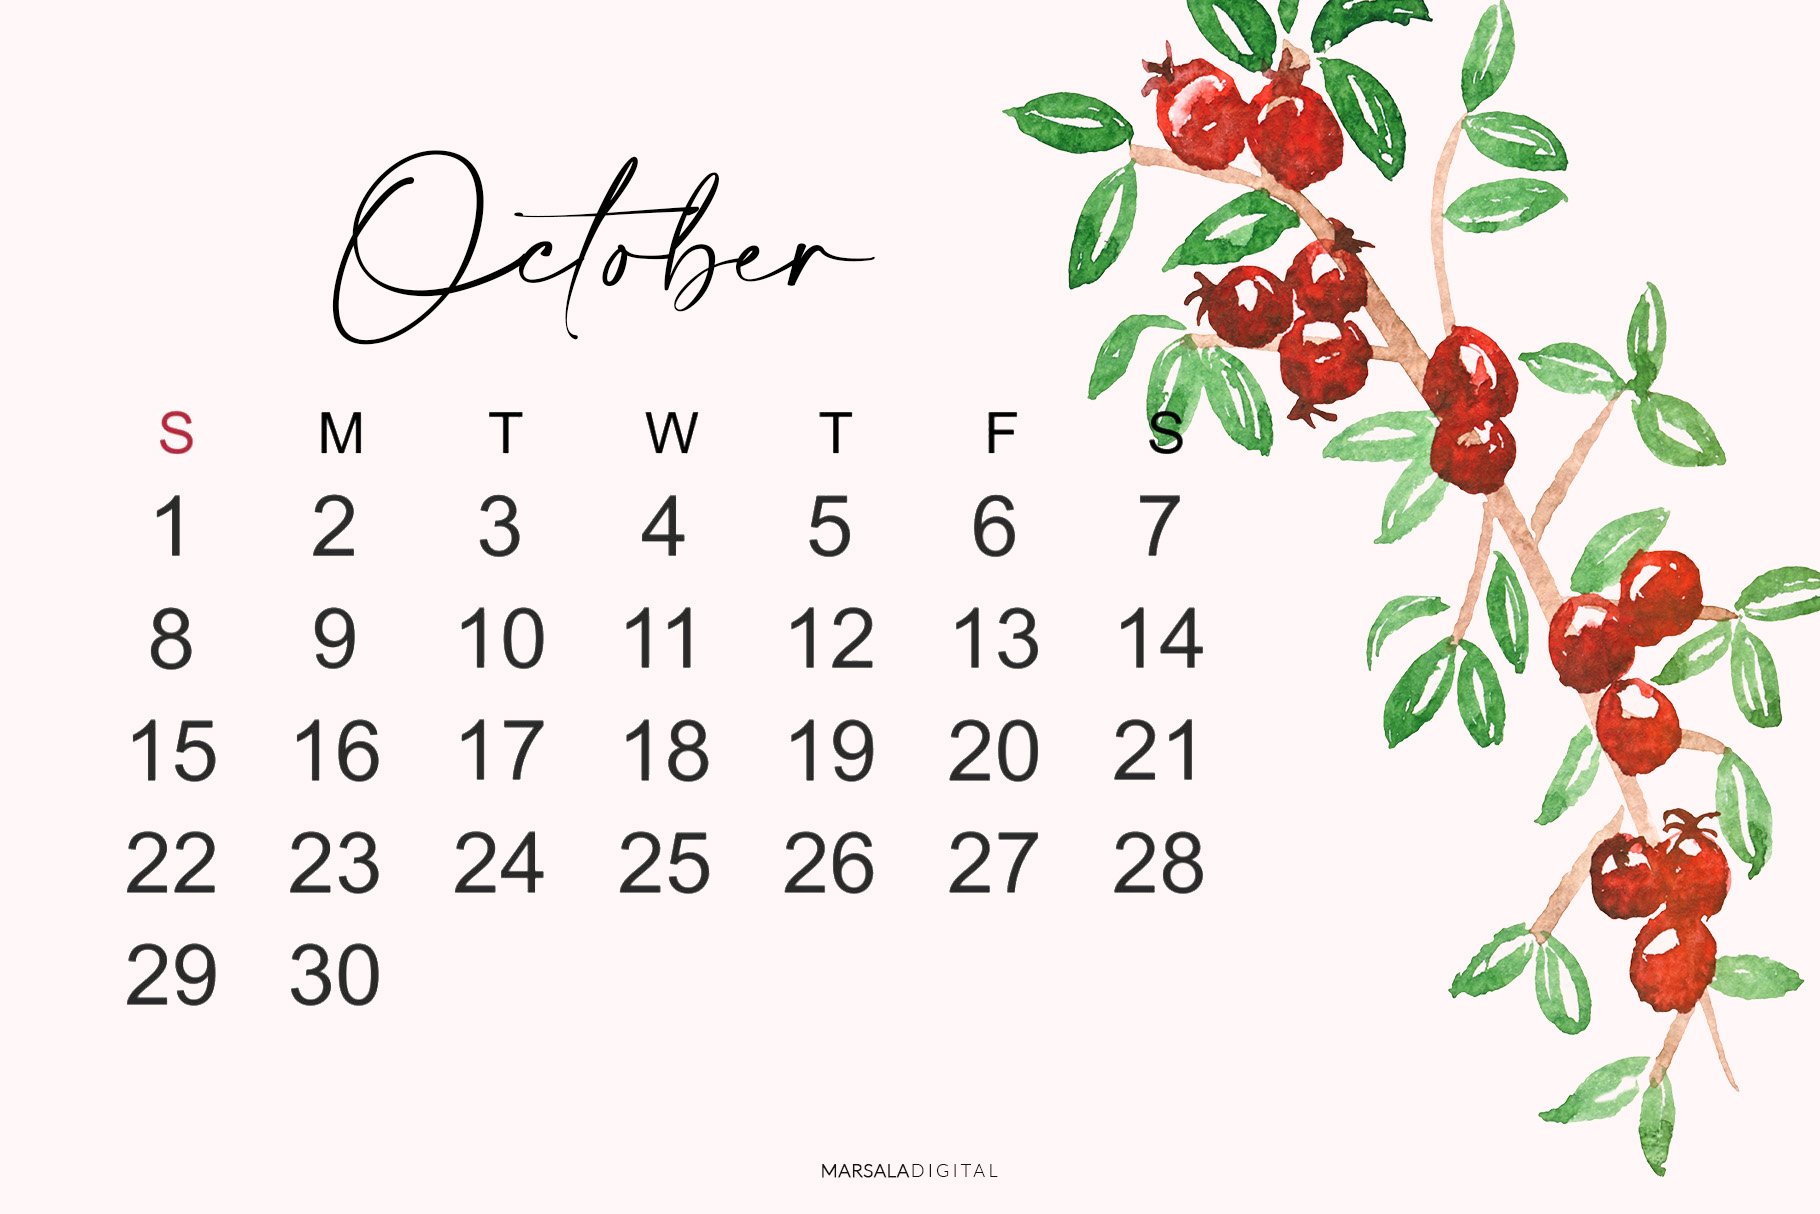 Drawing of a calendar with cherries on it.